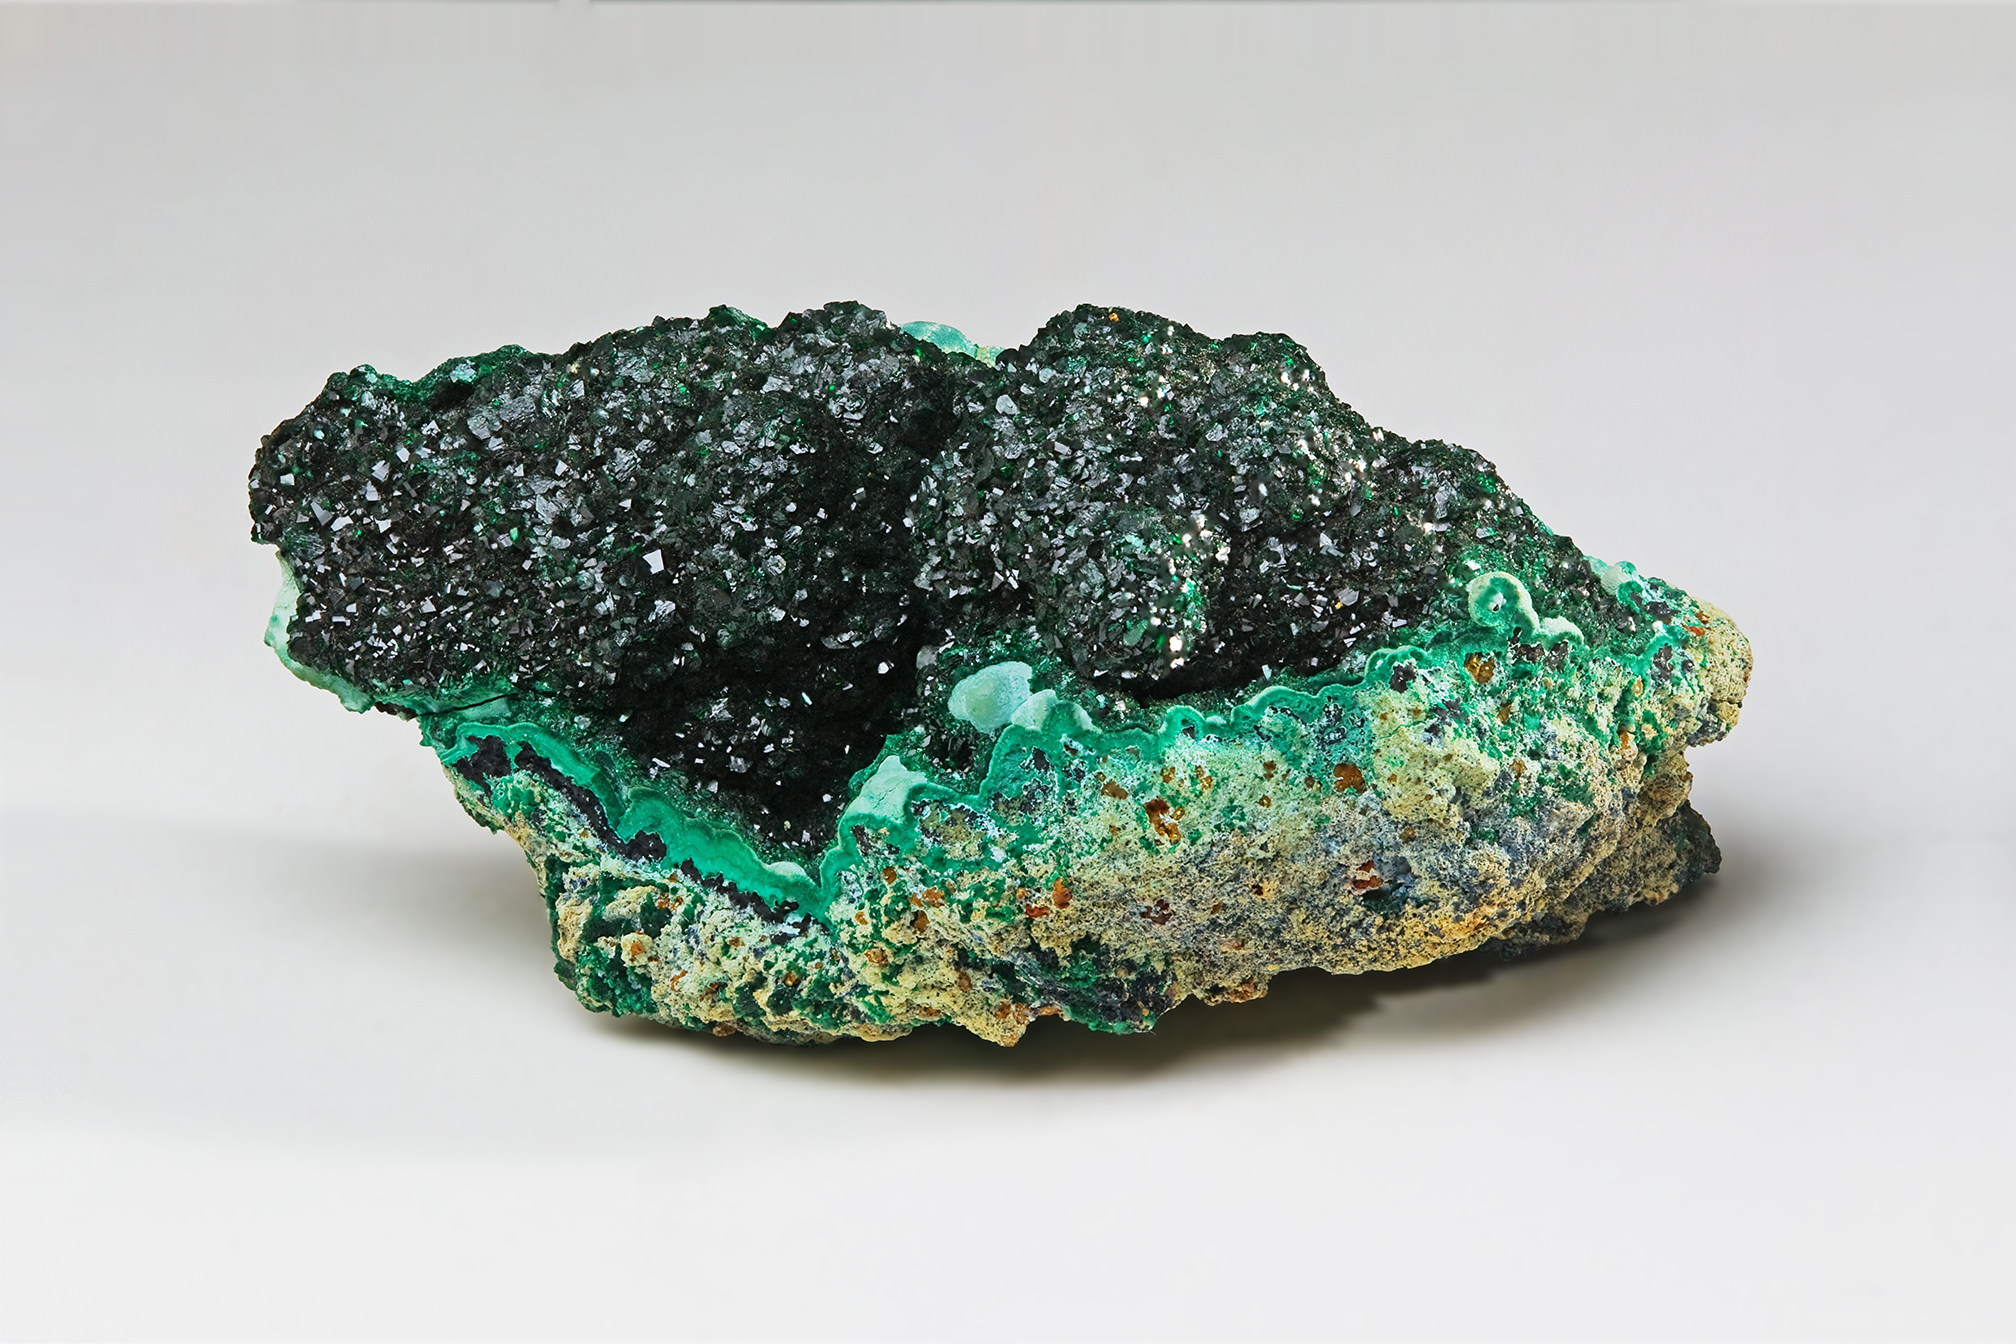 By JJ Harrison (https://www.jjharrison.com.au/) - Own work, CC BY-SA 3.0, (picture shows malachite, not necessarily the one from Vinča)